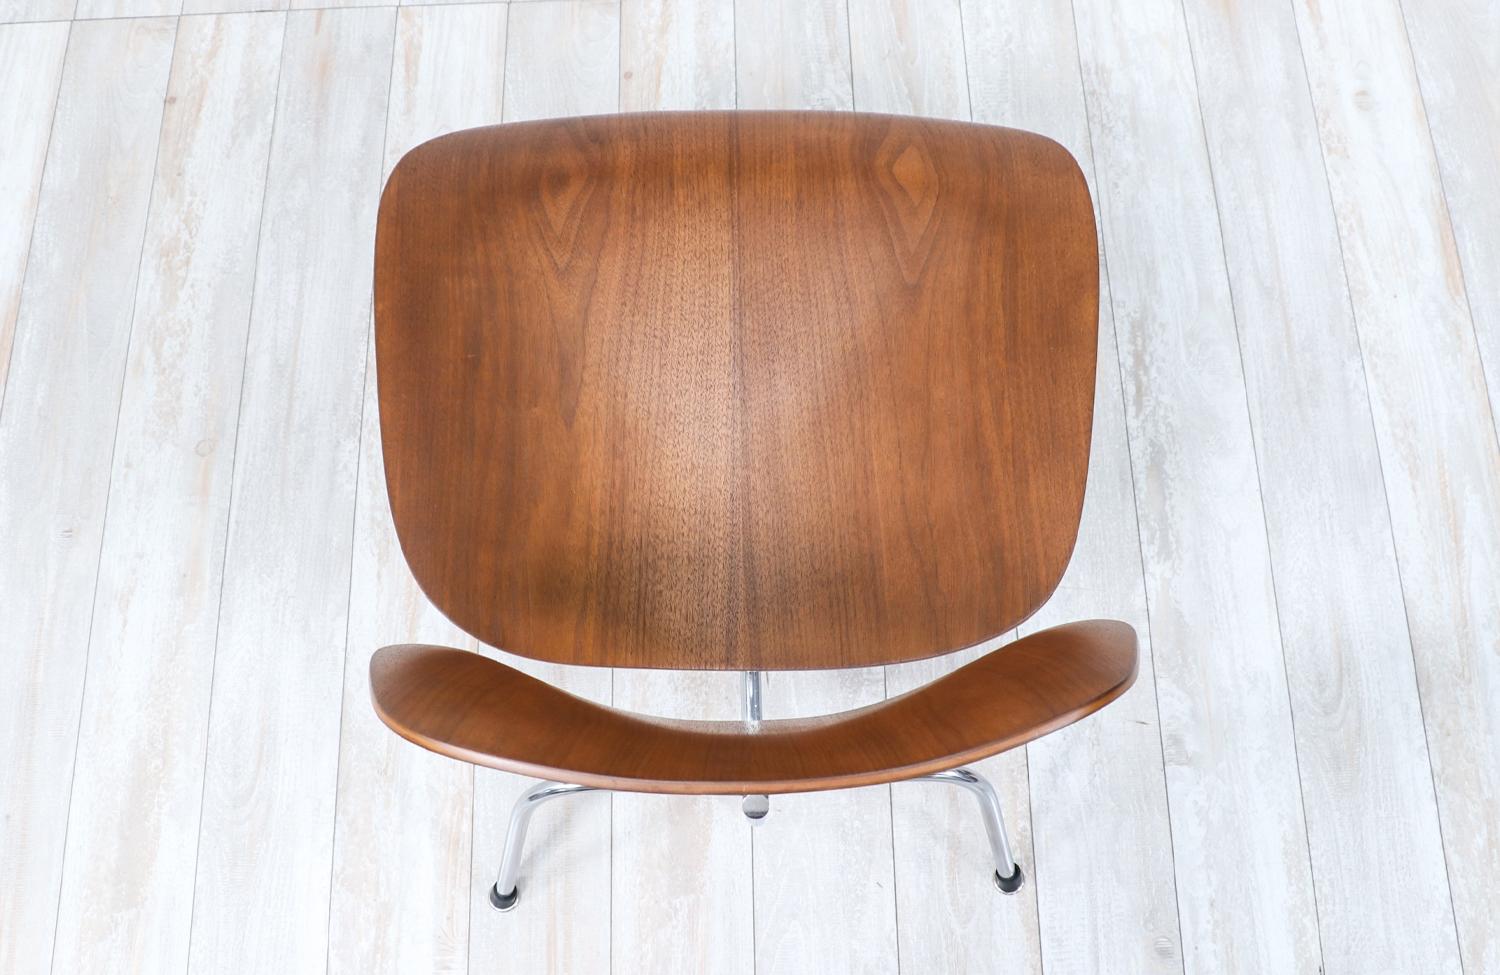  Expertly Restored - Vintage Charles & Ray Eames LCM Chair for Herman Miller In Excellent Condition For Sale In Los Angeles, CA